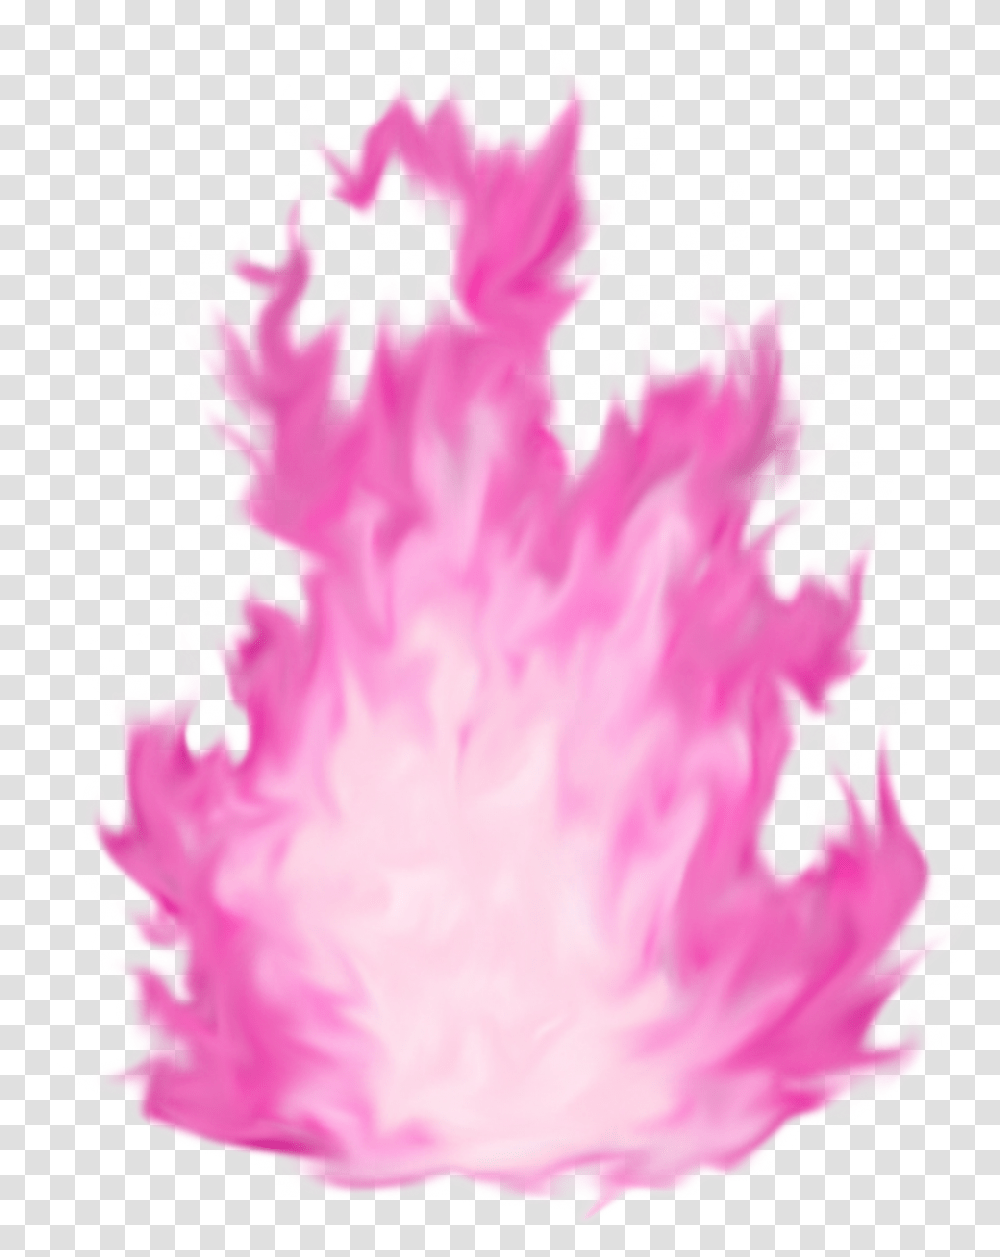 Purple Fire Download Pink Fire, Flame Transparent Png